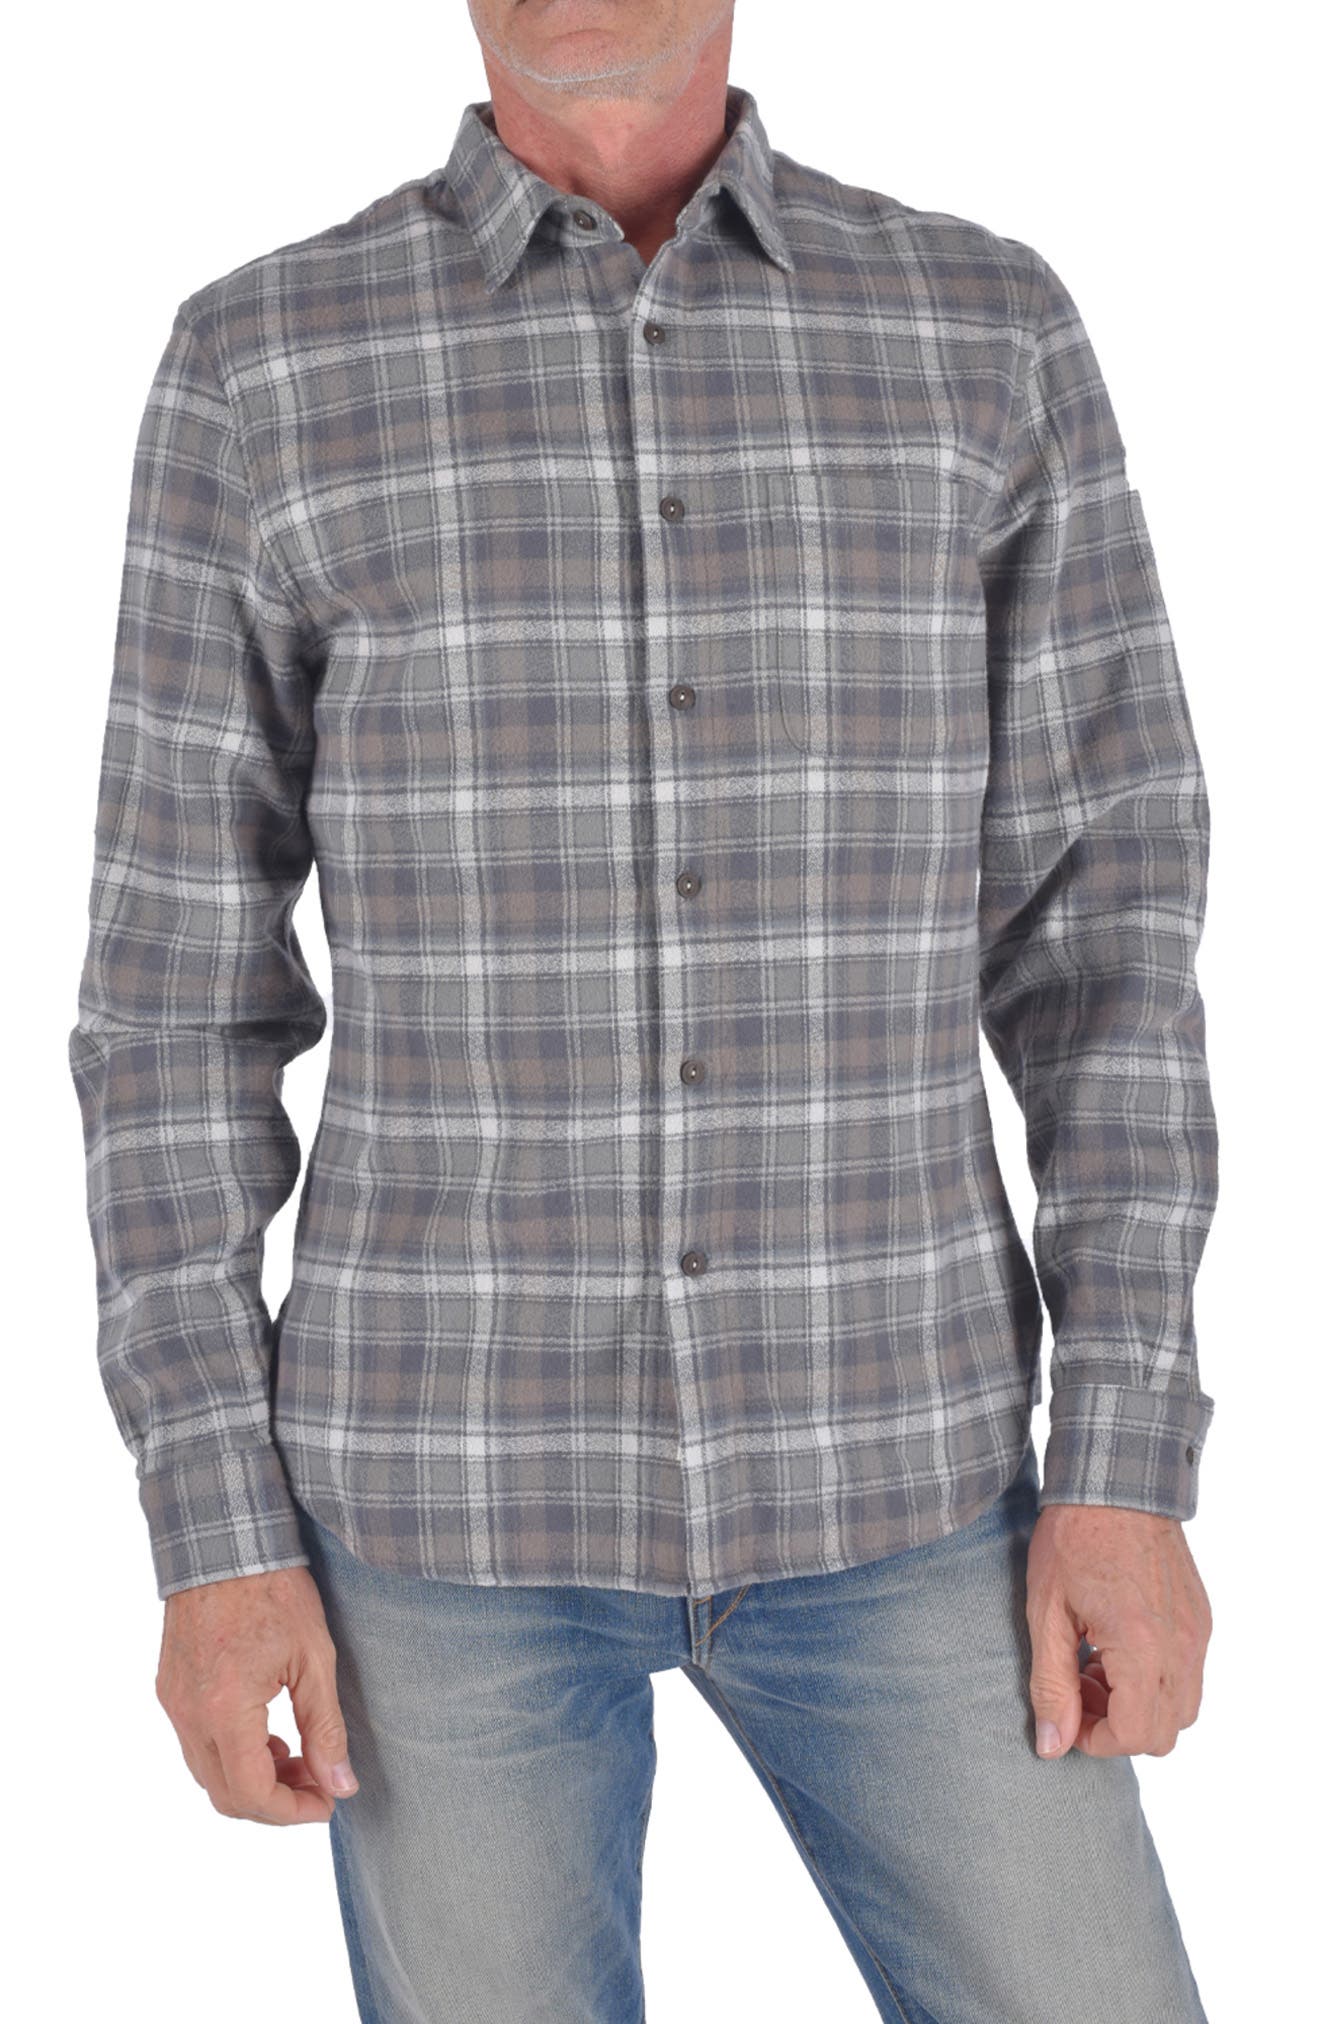 Mens City Trim Fit Plaid Stretch Flannel Button-Down Shirt in Gray Heather Large Plaid at Nordstrom Nordstrom Men Clothing Shirts Casual Shirts 